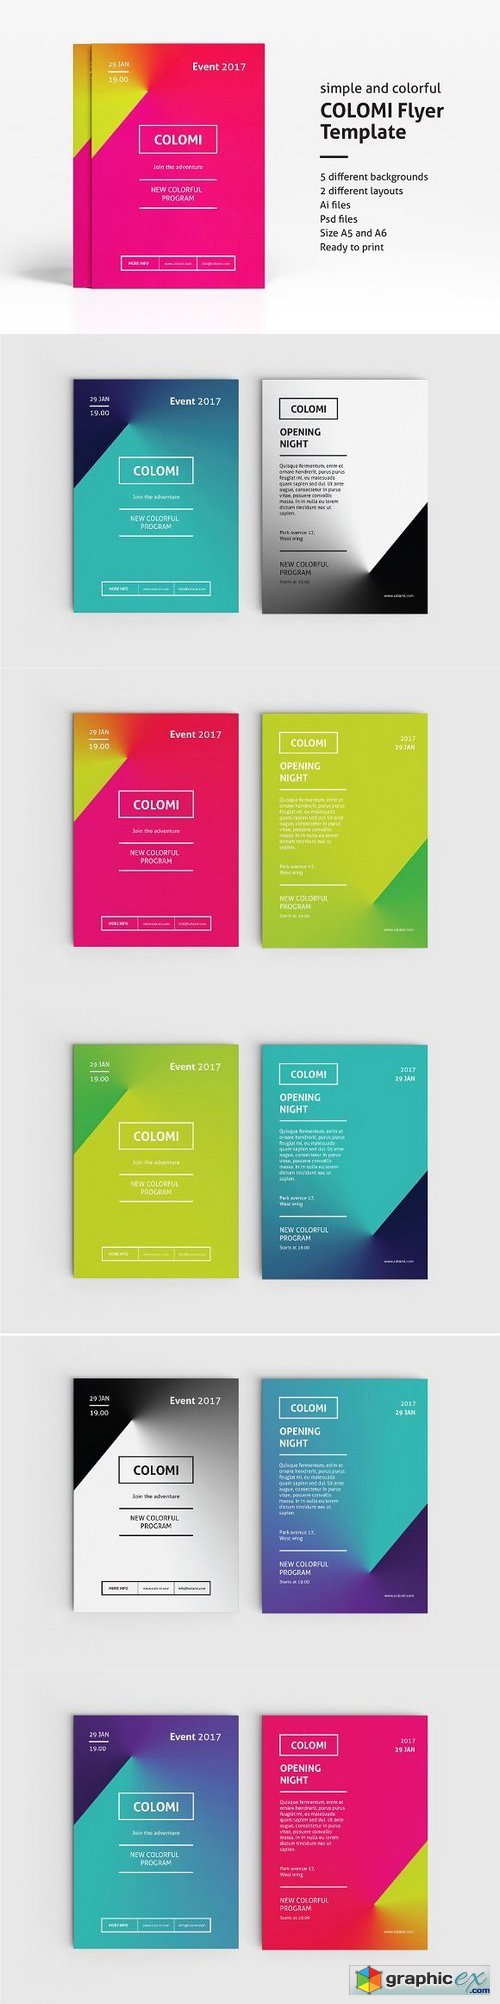 Colomi - Flyer Template